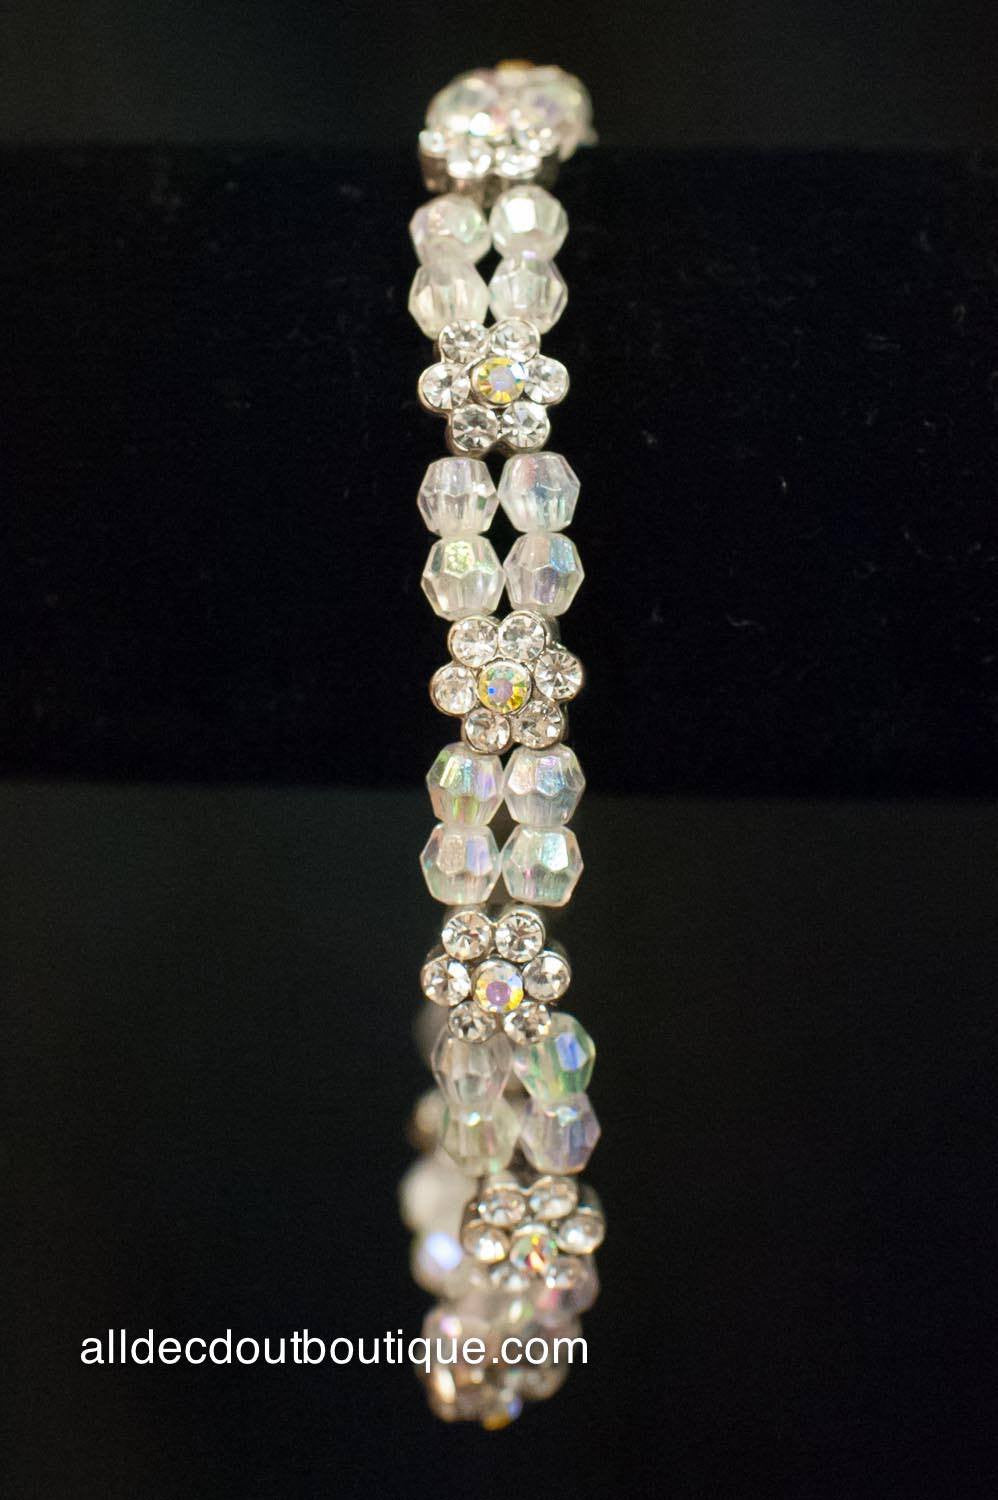 ADO | Beaded Ankle Stretch Bracelet with Crystal Flowers - All Decd Out